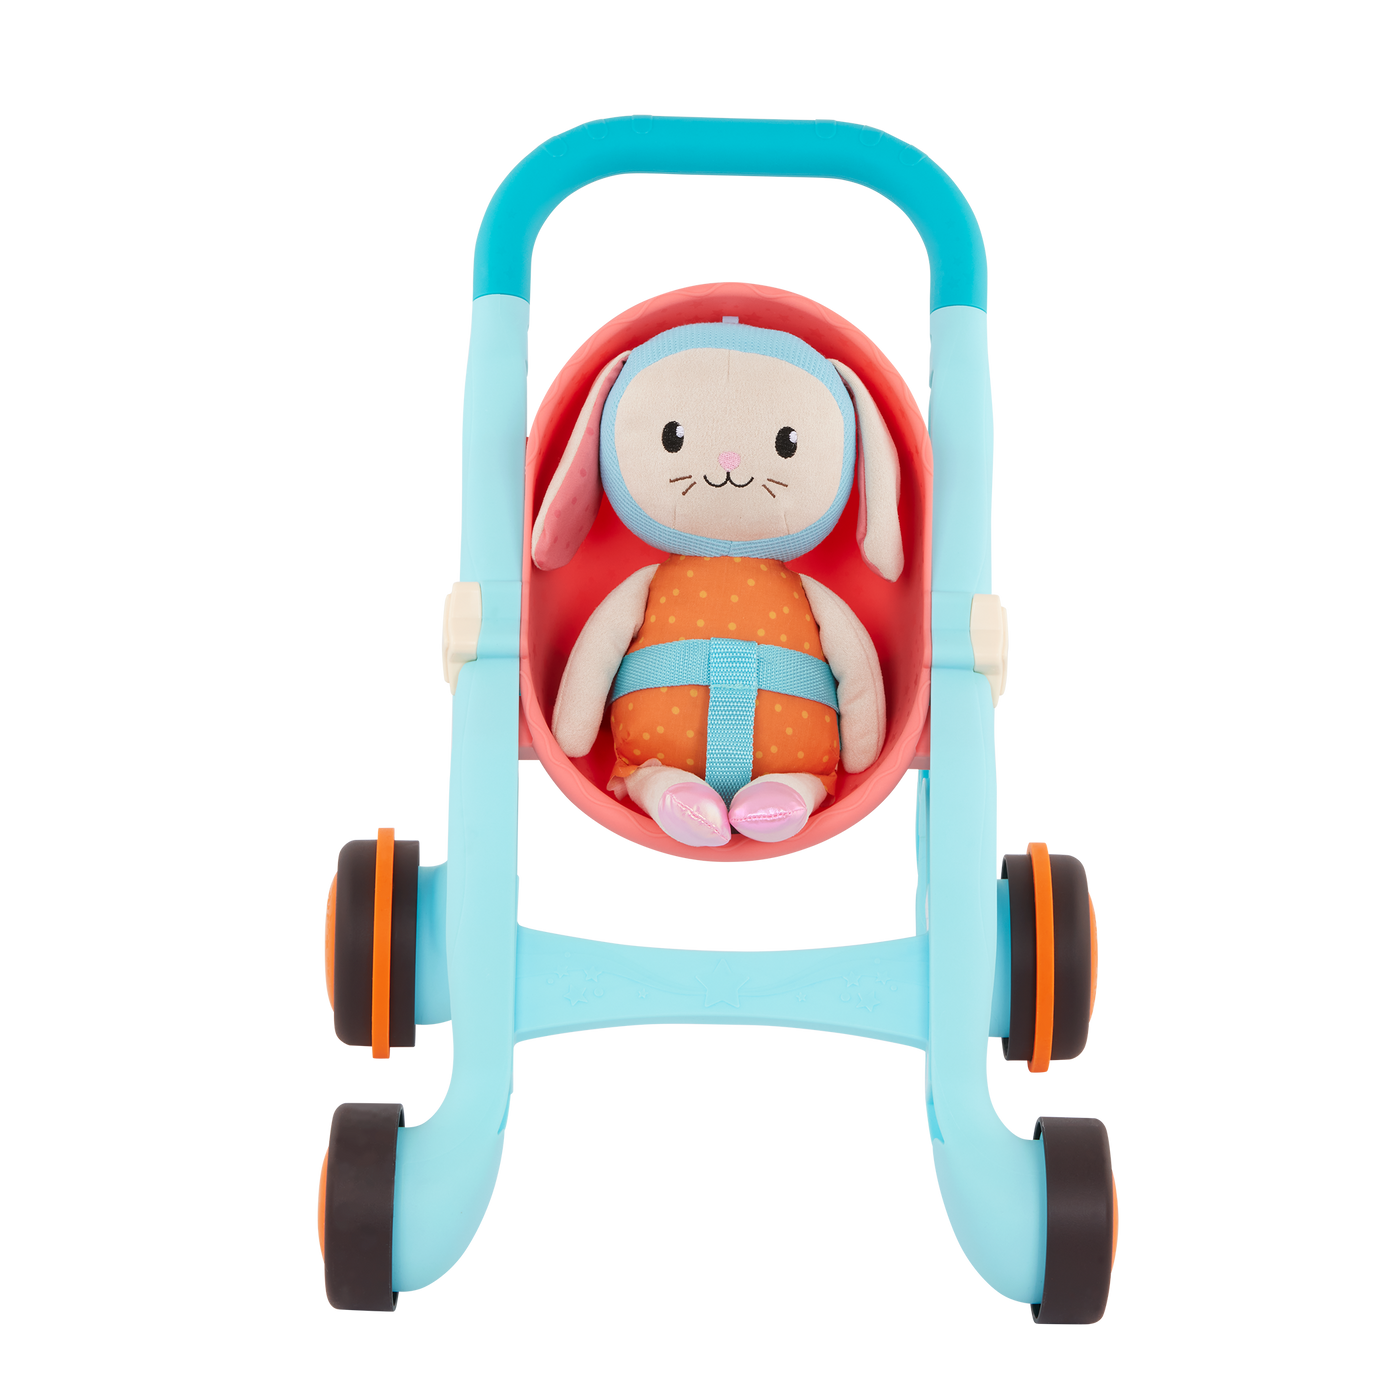 Toy stroller with plush bunny.